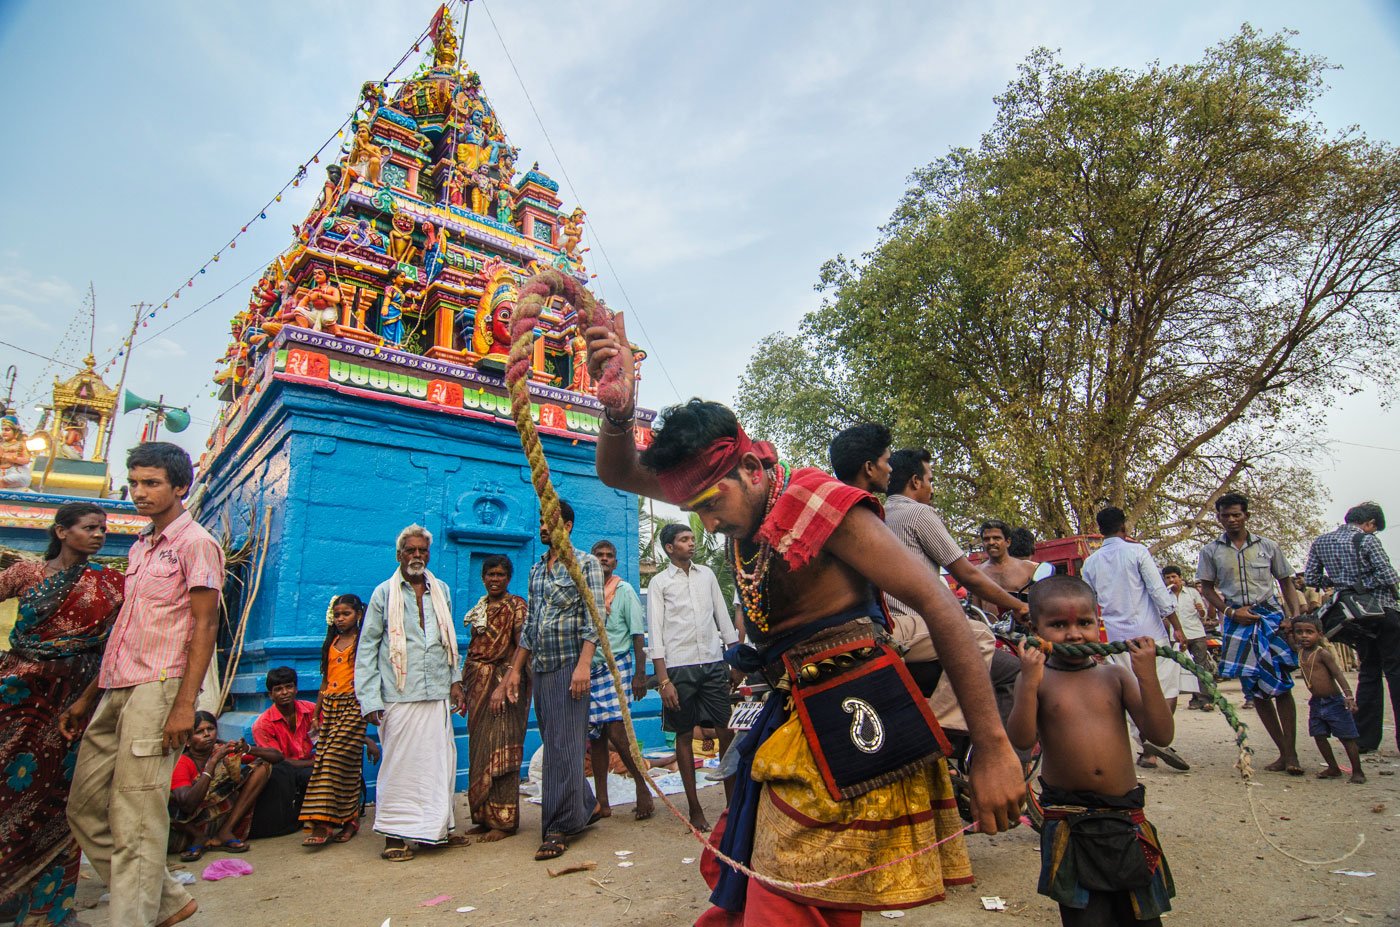 The temple dedicated to Lord Aravan (known locally as Koothandavar) is in Koovagam village, about 30-40 kilometres from Viluppuram town in Tamil Nadu. A man whipping himself in front of a temple.